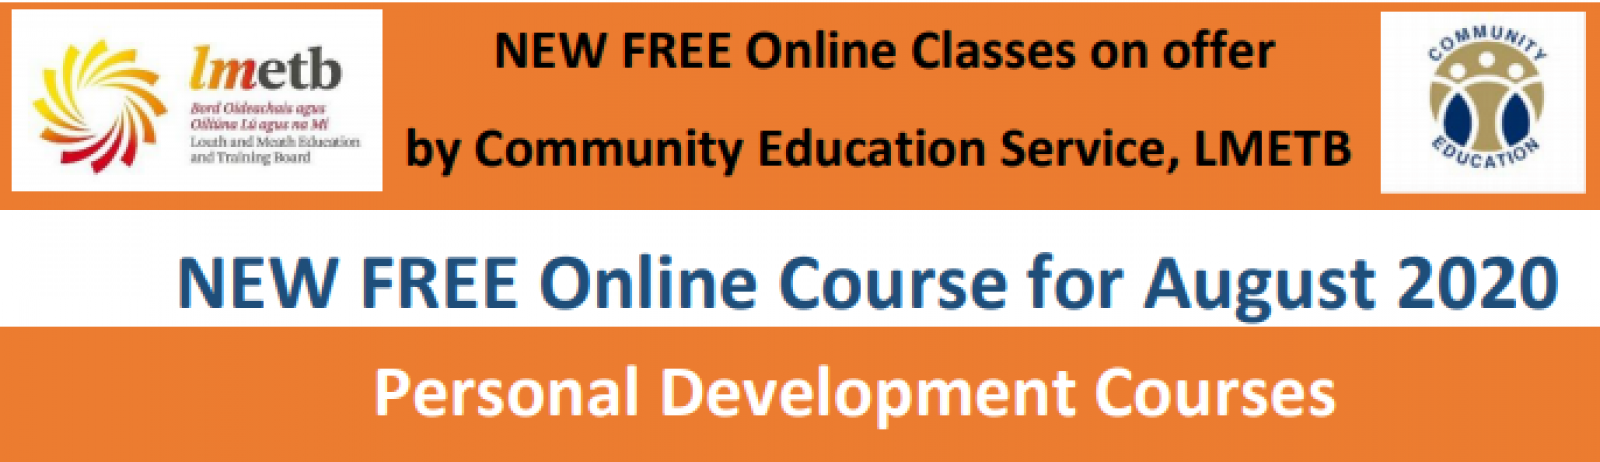 Free Online Community Education Courses for August 2020